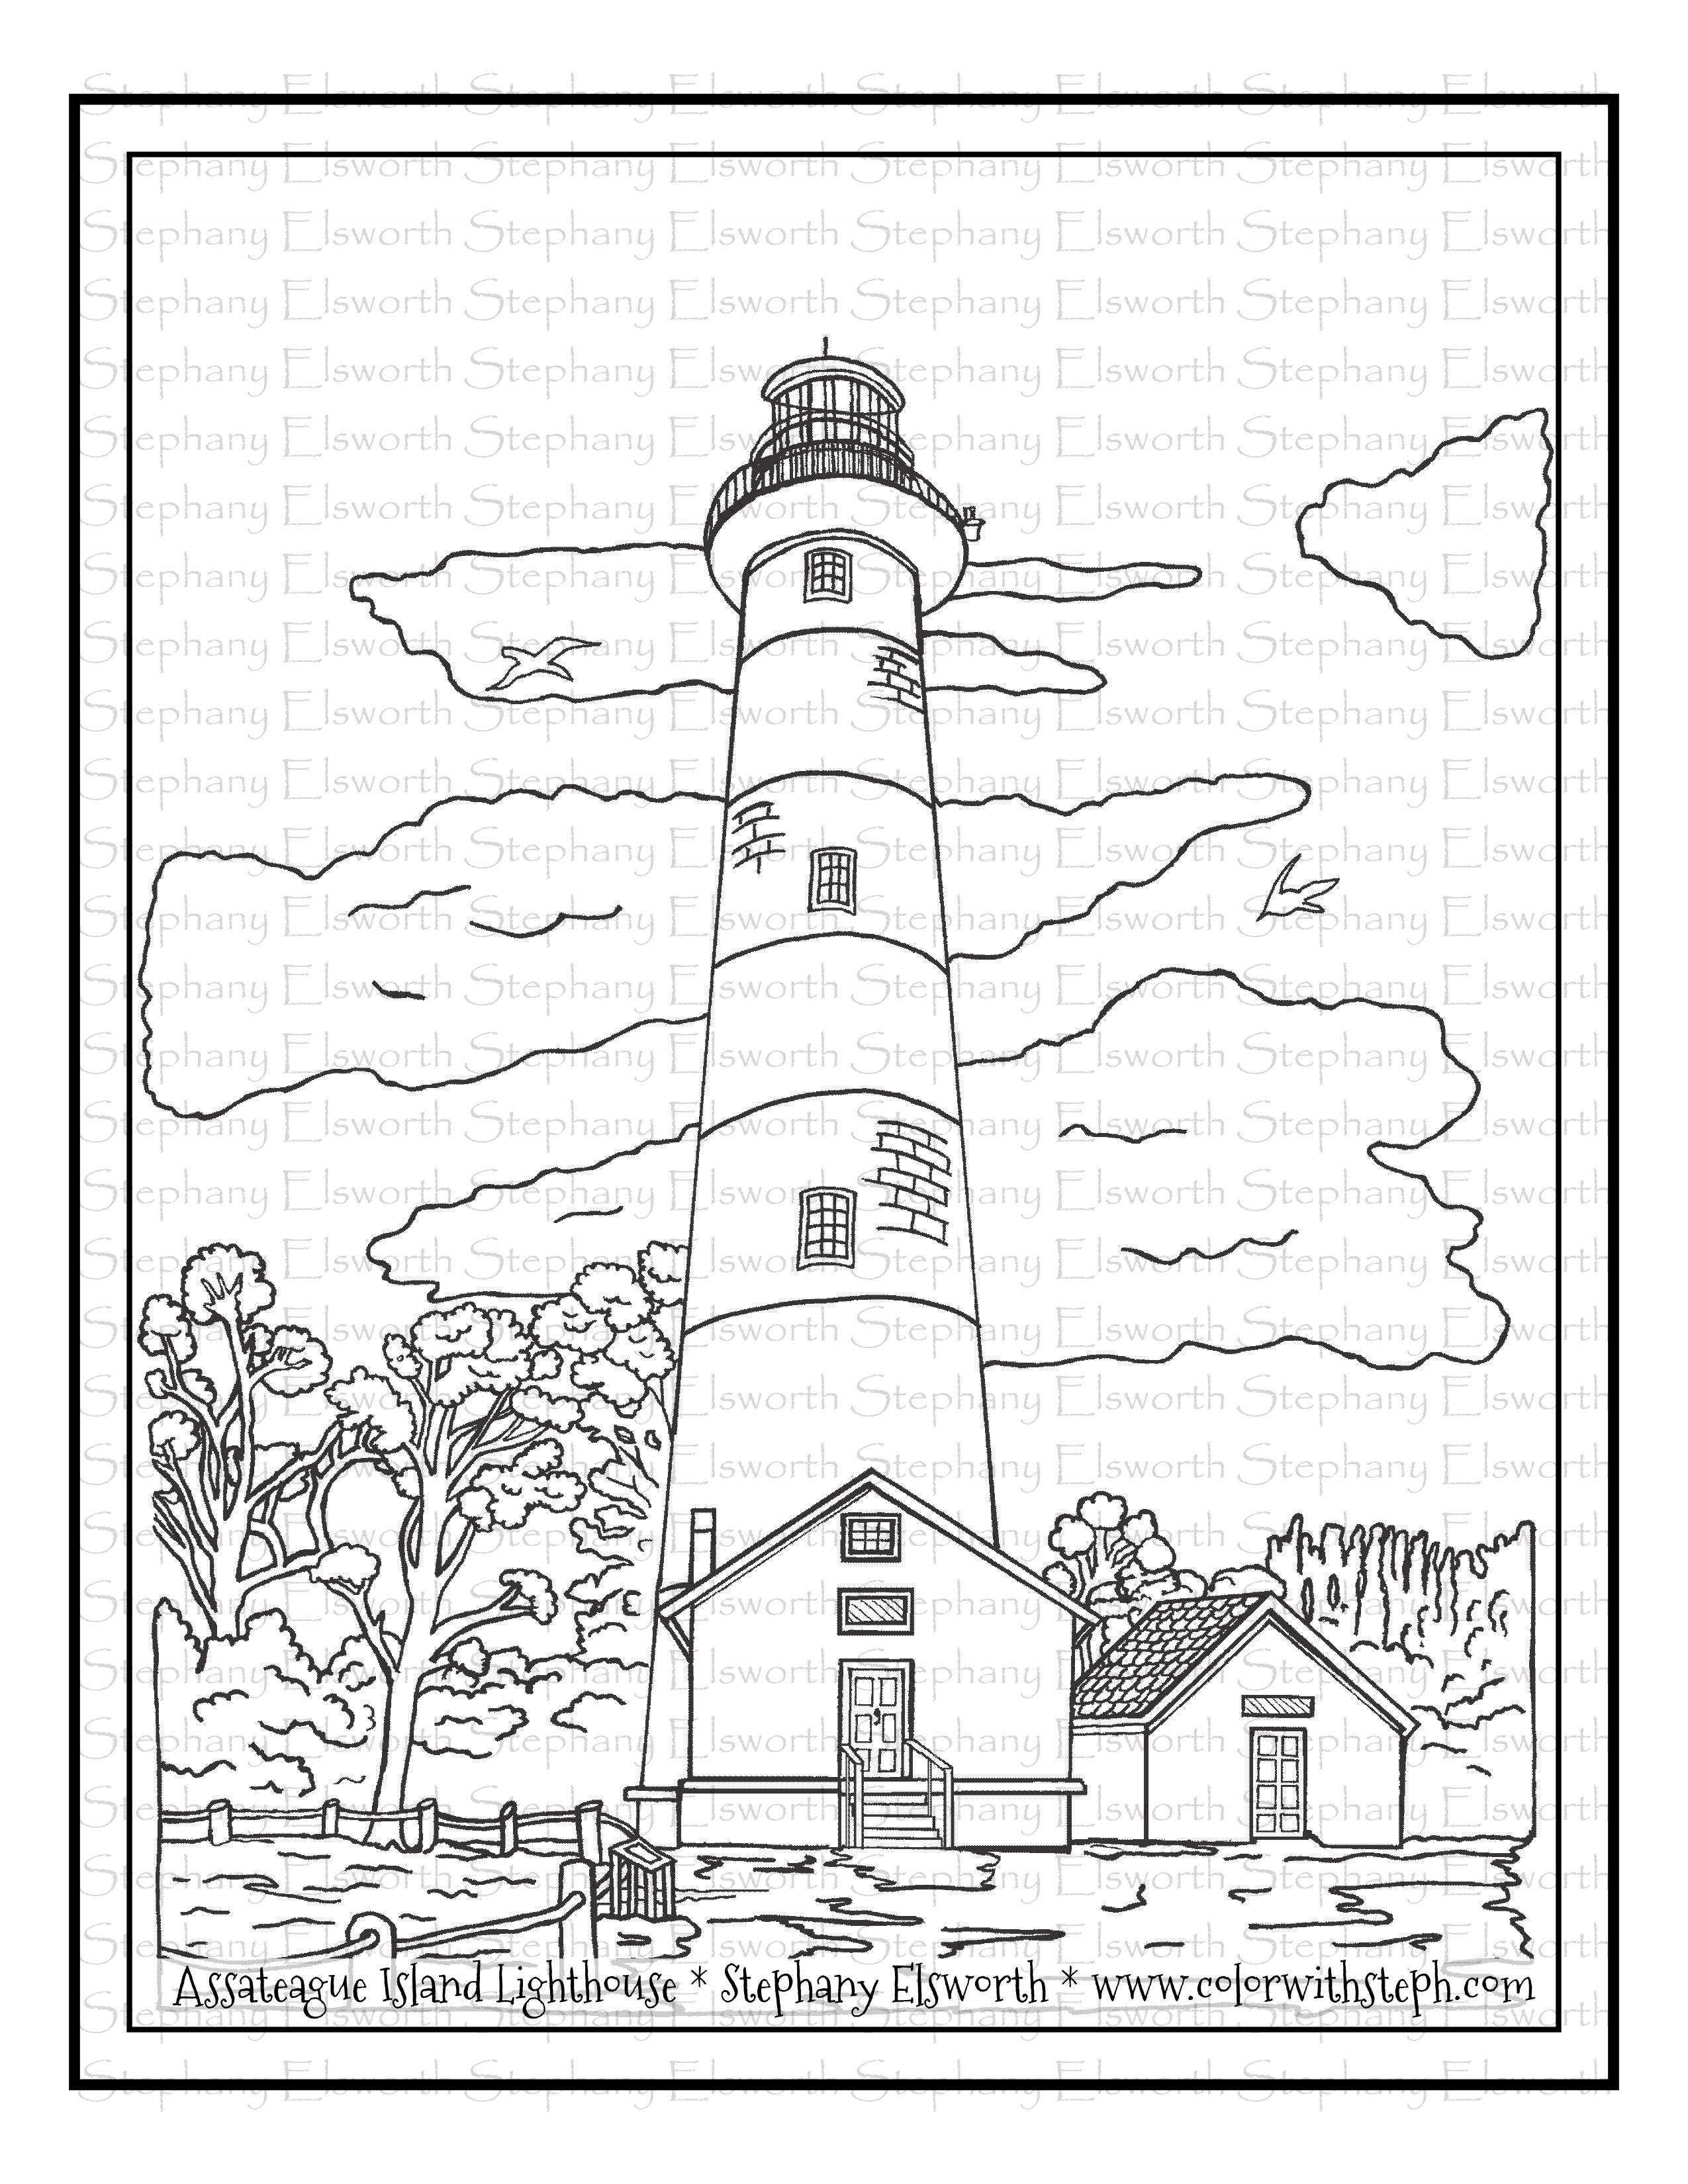 Assateague Island Lighthouse Free Coloring Page - Color with Steph